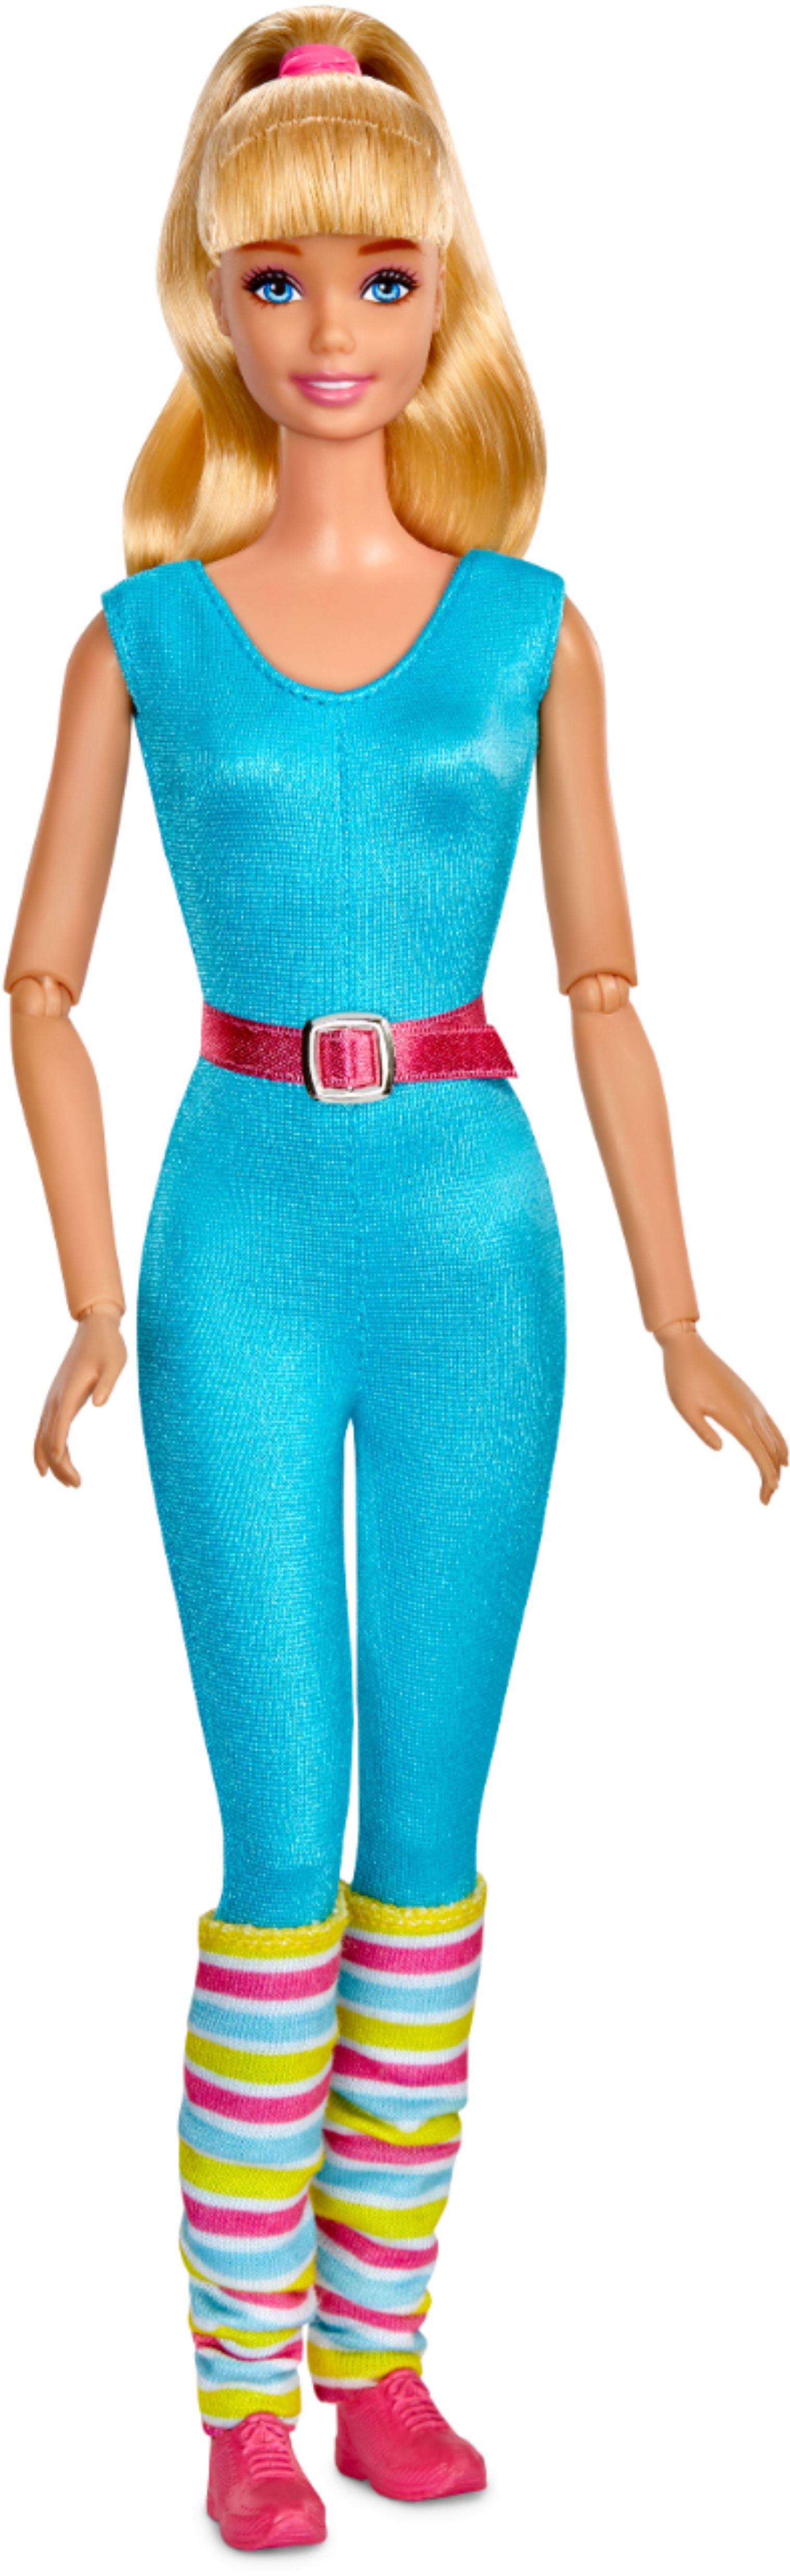 toy story 4 barbie clothes